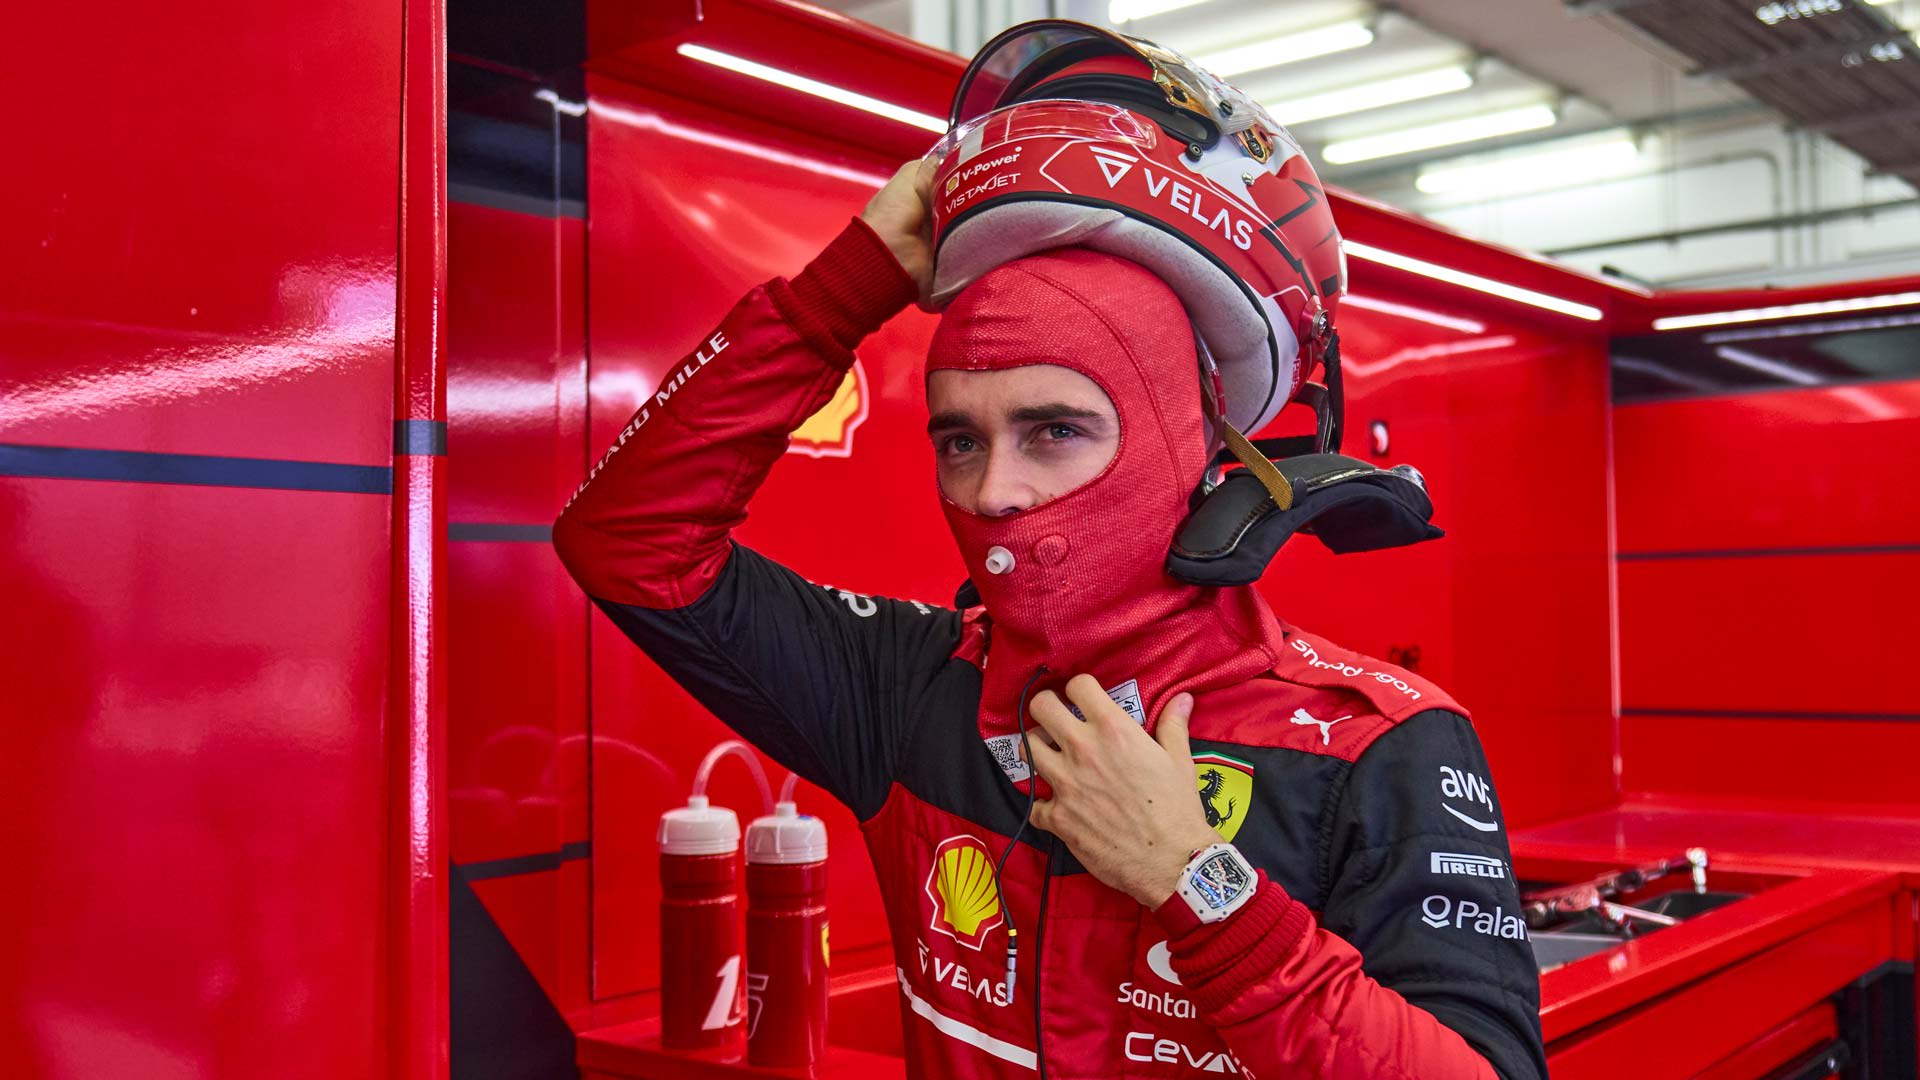 Charles Leclerc says his goal is to 'fight for wins' with Ferrari in 2022  ahead of season-opener | Formula 1®